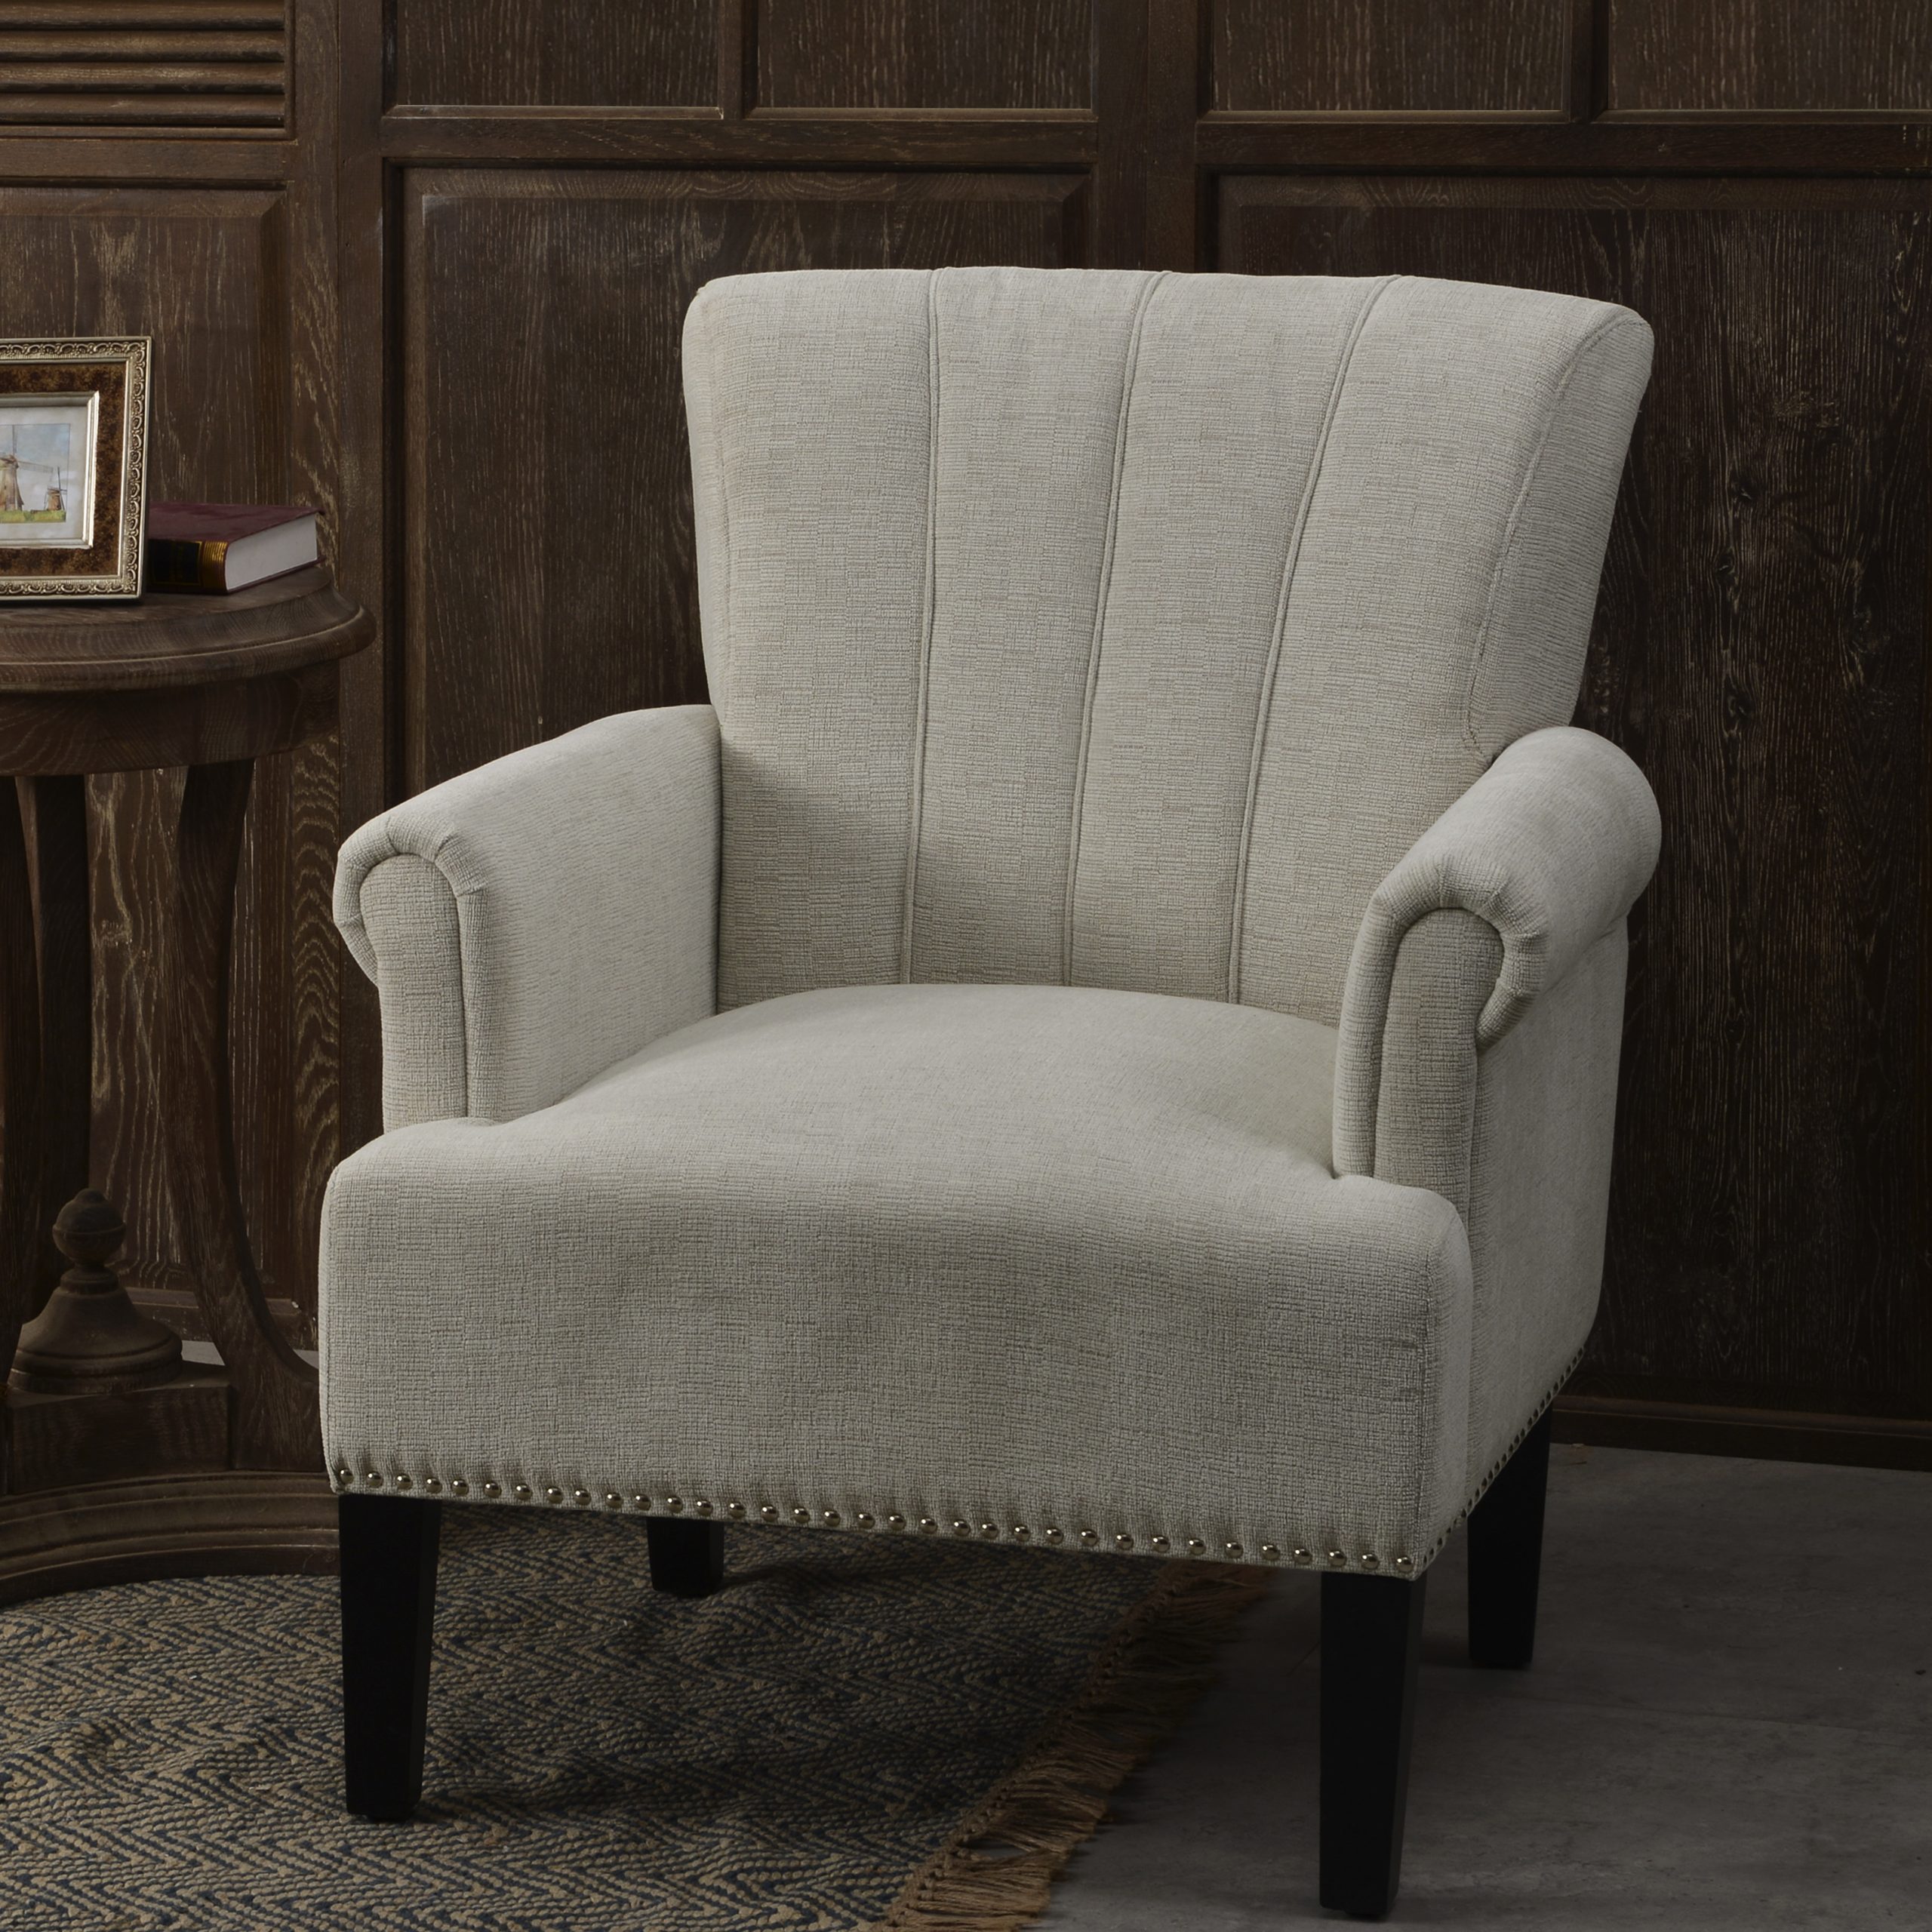 Accent Rivet Tufted Polyester Armchair - PP212520CAA